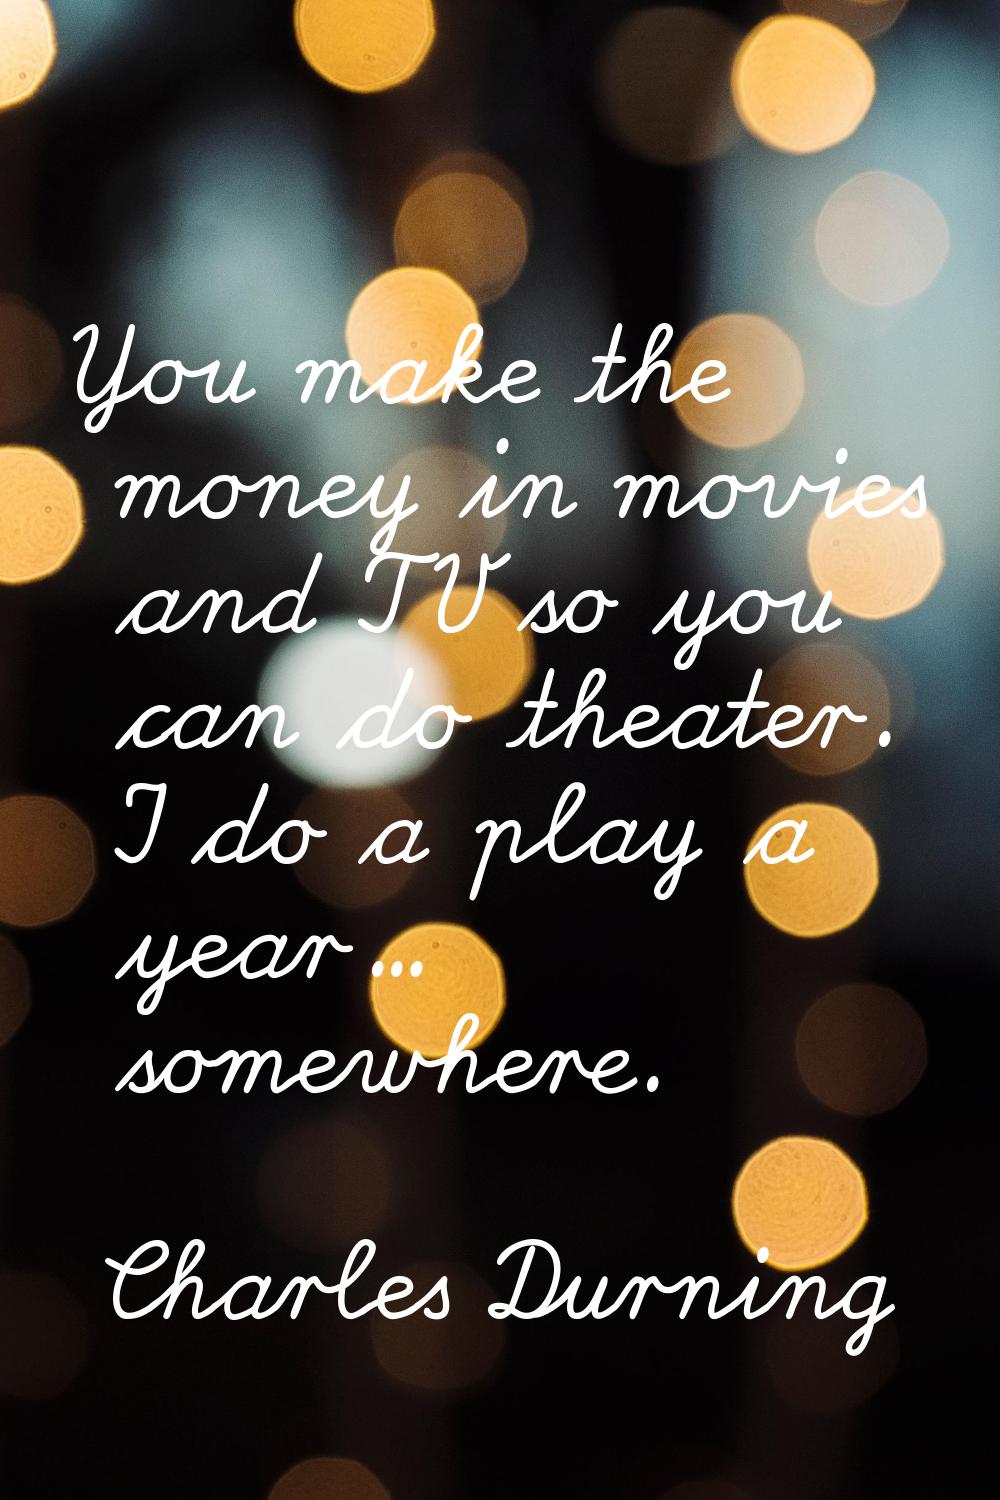 You make the money in movies and TV so you can do theater. I do a play a year... somewhere.